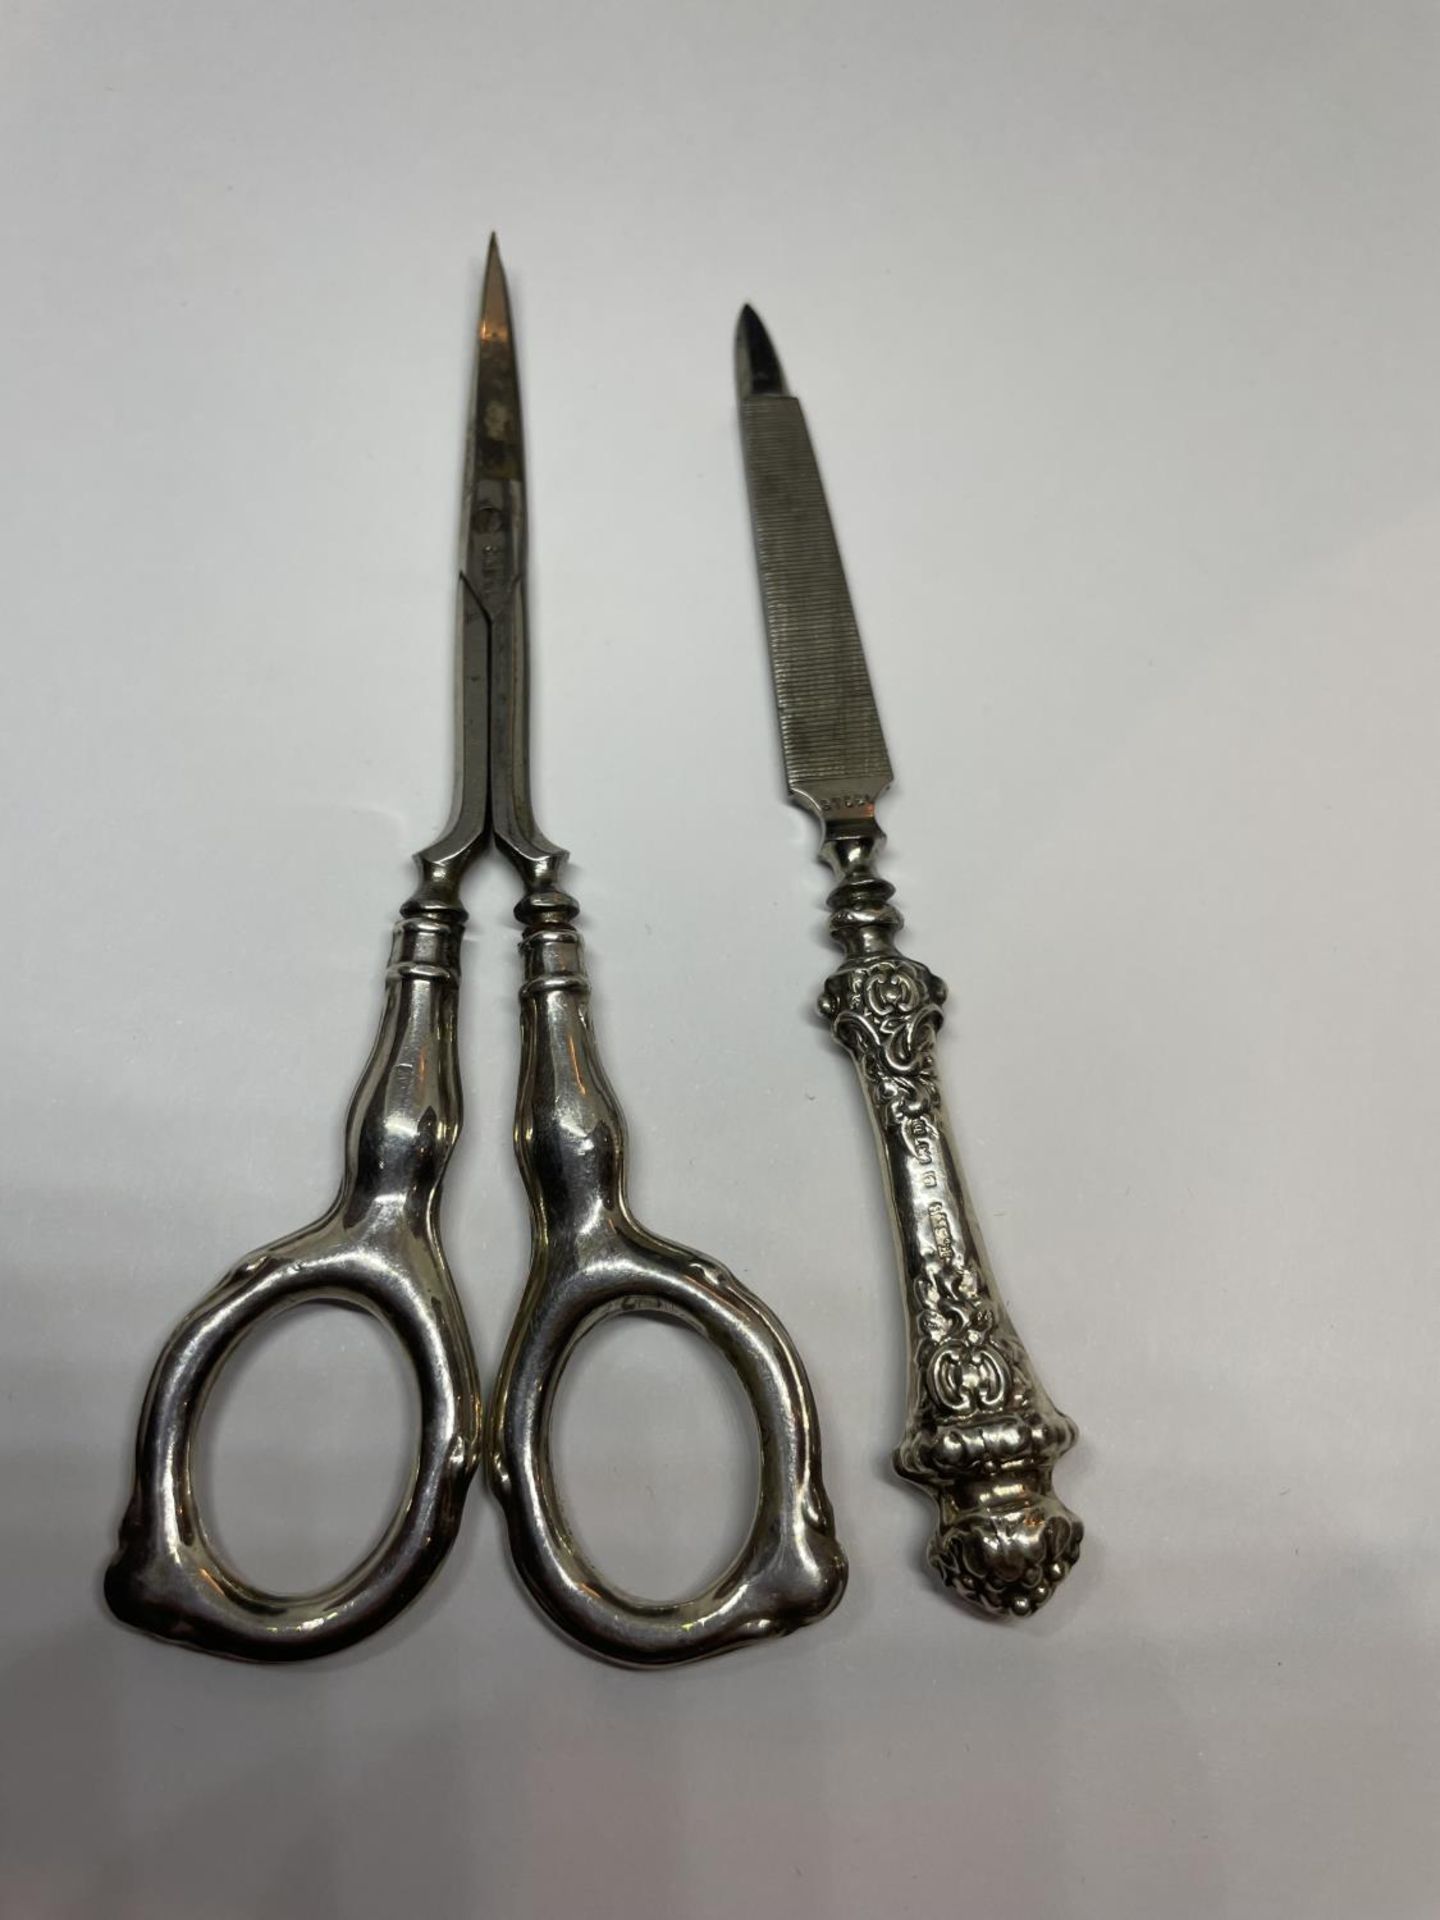 TWO SILVER HANDLED ITEMS TO INCLUDE A PAIR OF SISSORS AND A NAIL FILE - Image 2 of 3